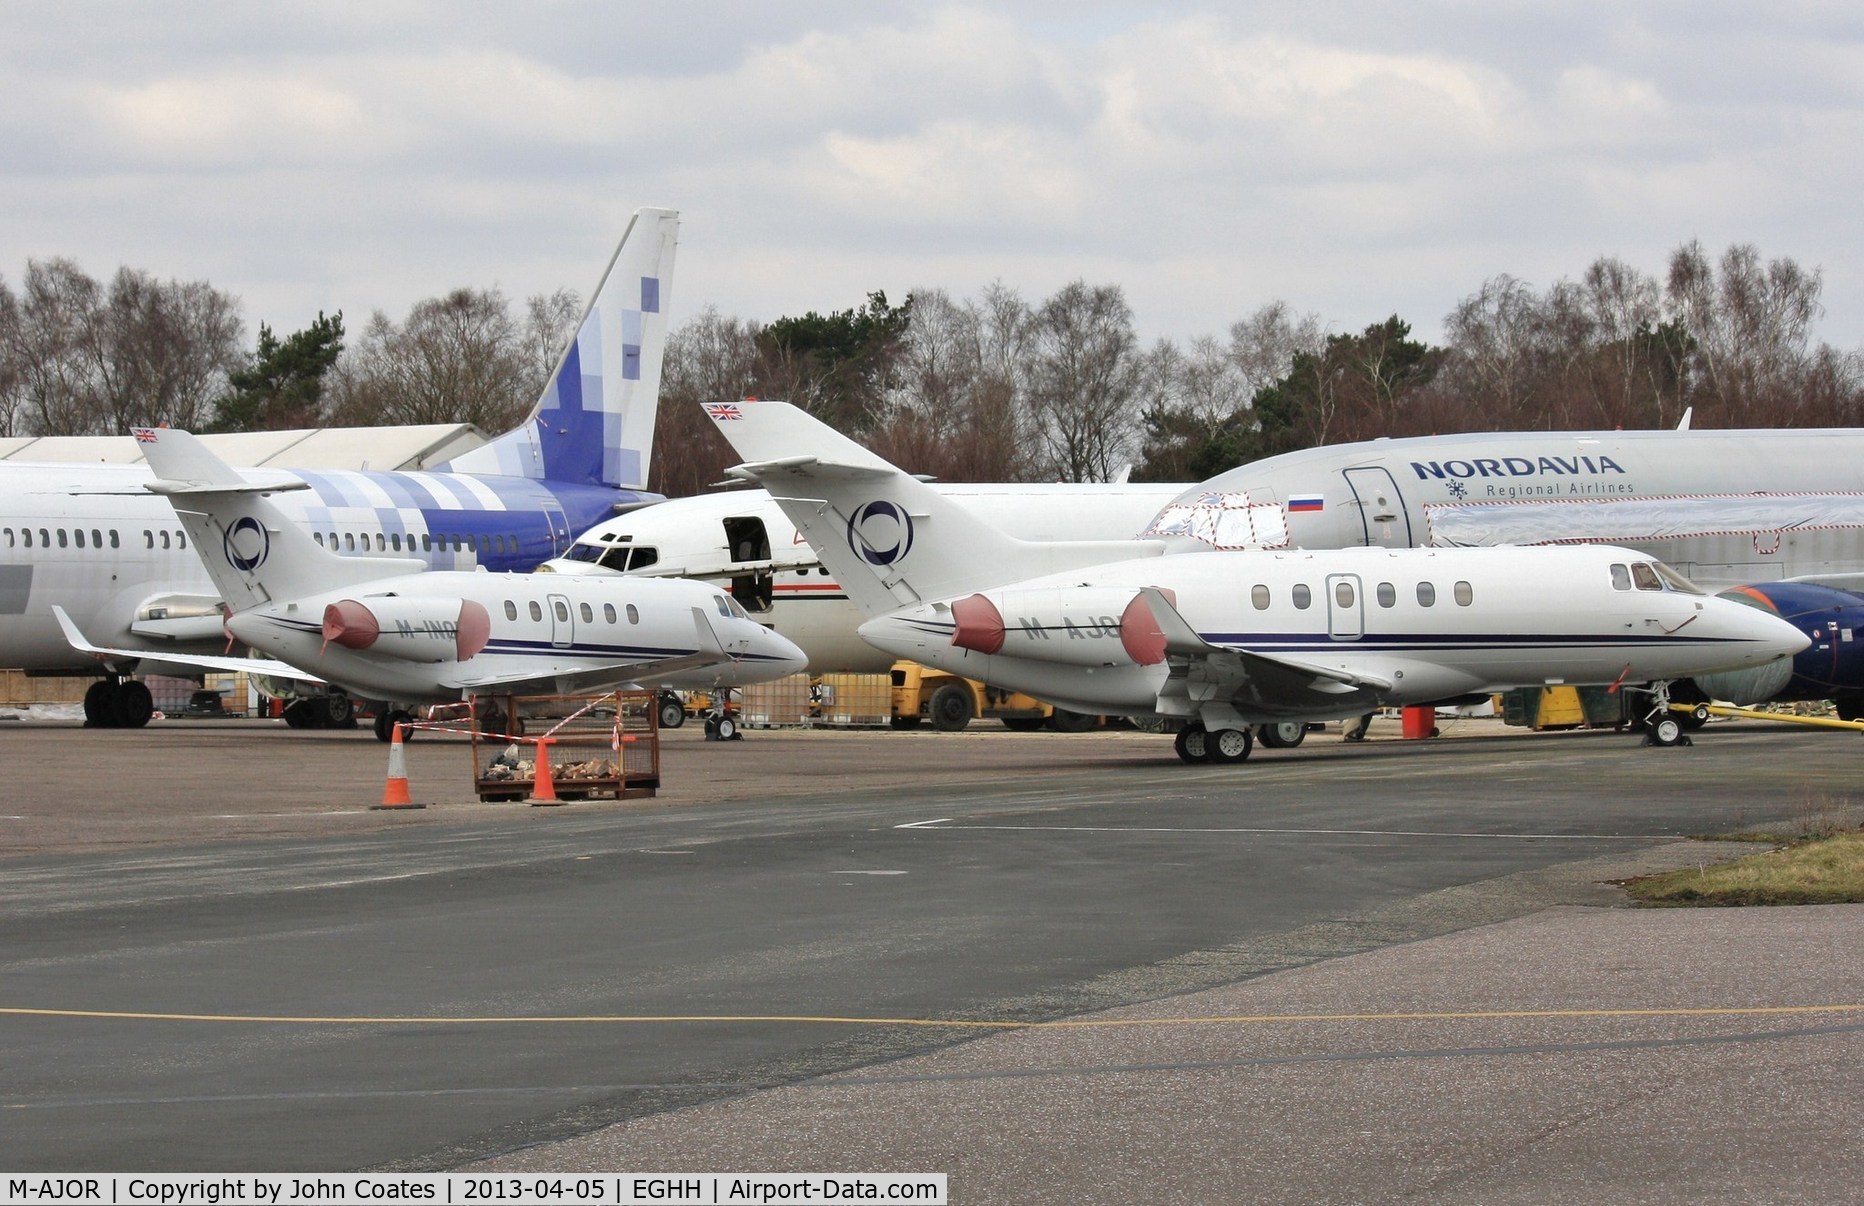 M-AJOR, 2008 Hawker Beechcraft 900XP C/N HA-0058, With stablemate M-INOR on the apron